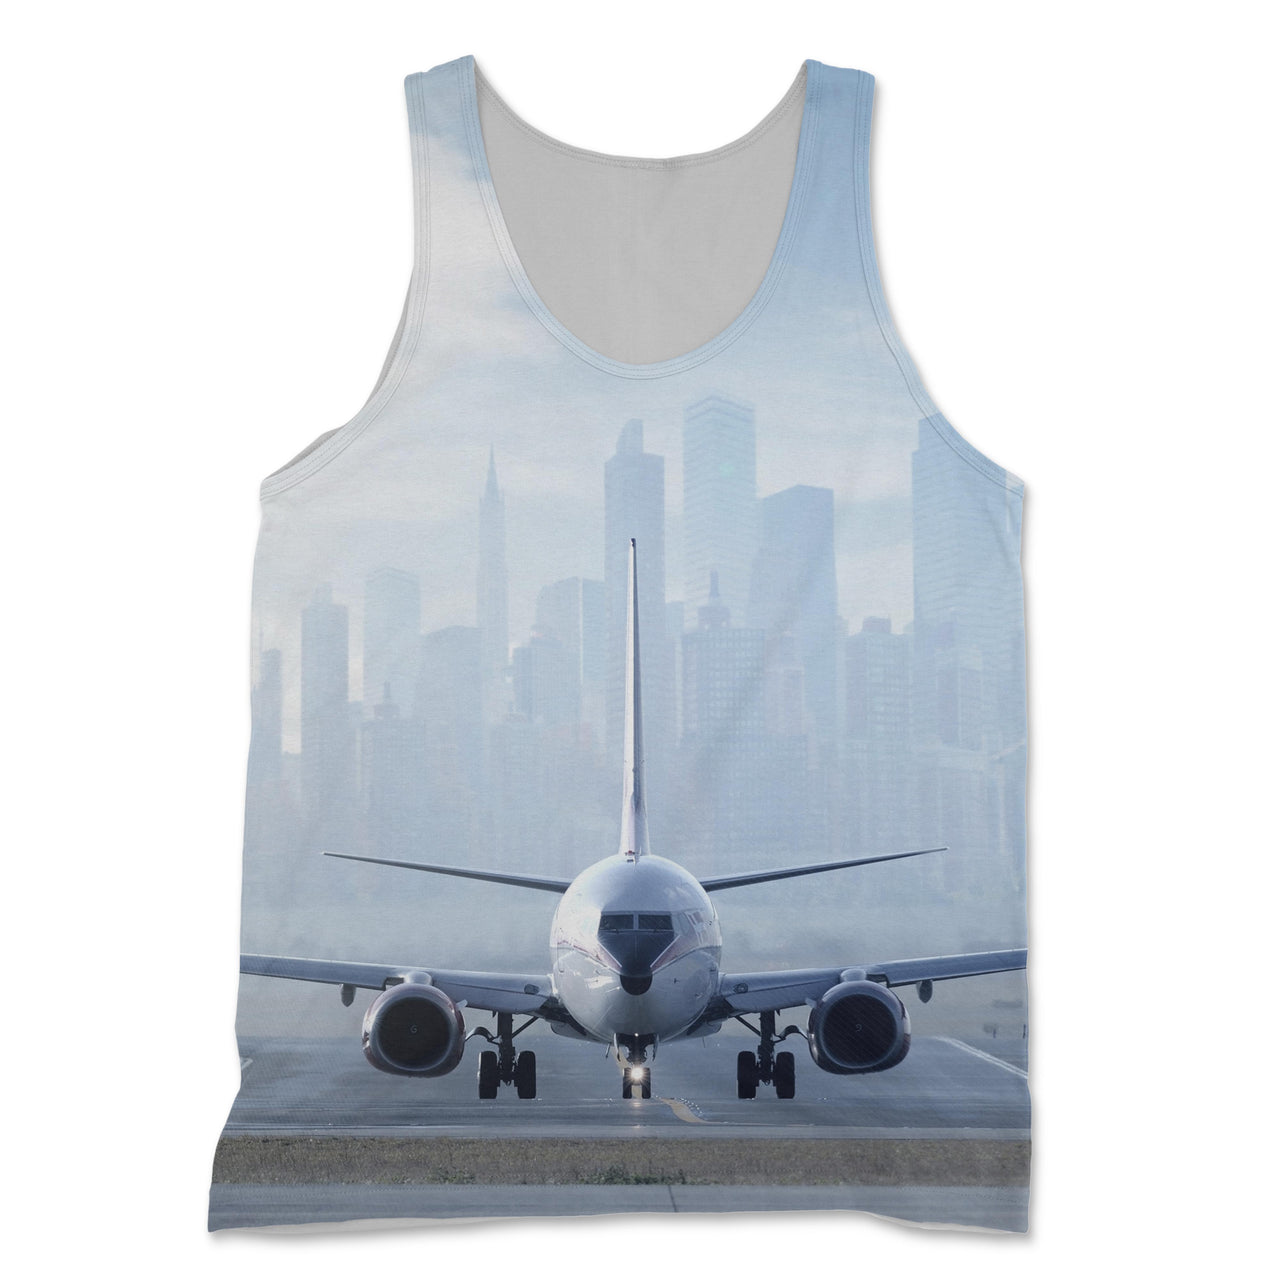 Boeing 737 & City View Behind Designed 3D Tank Tops